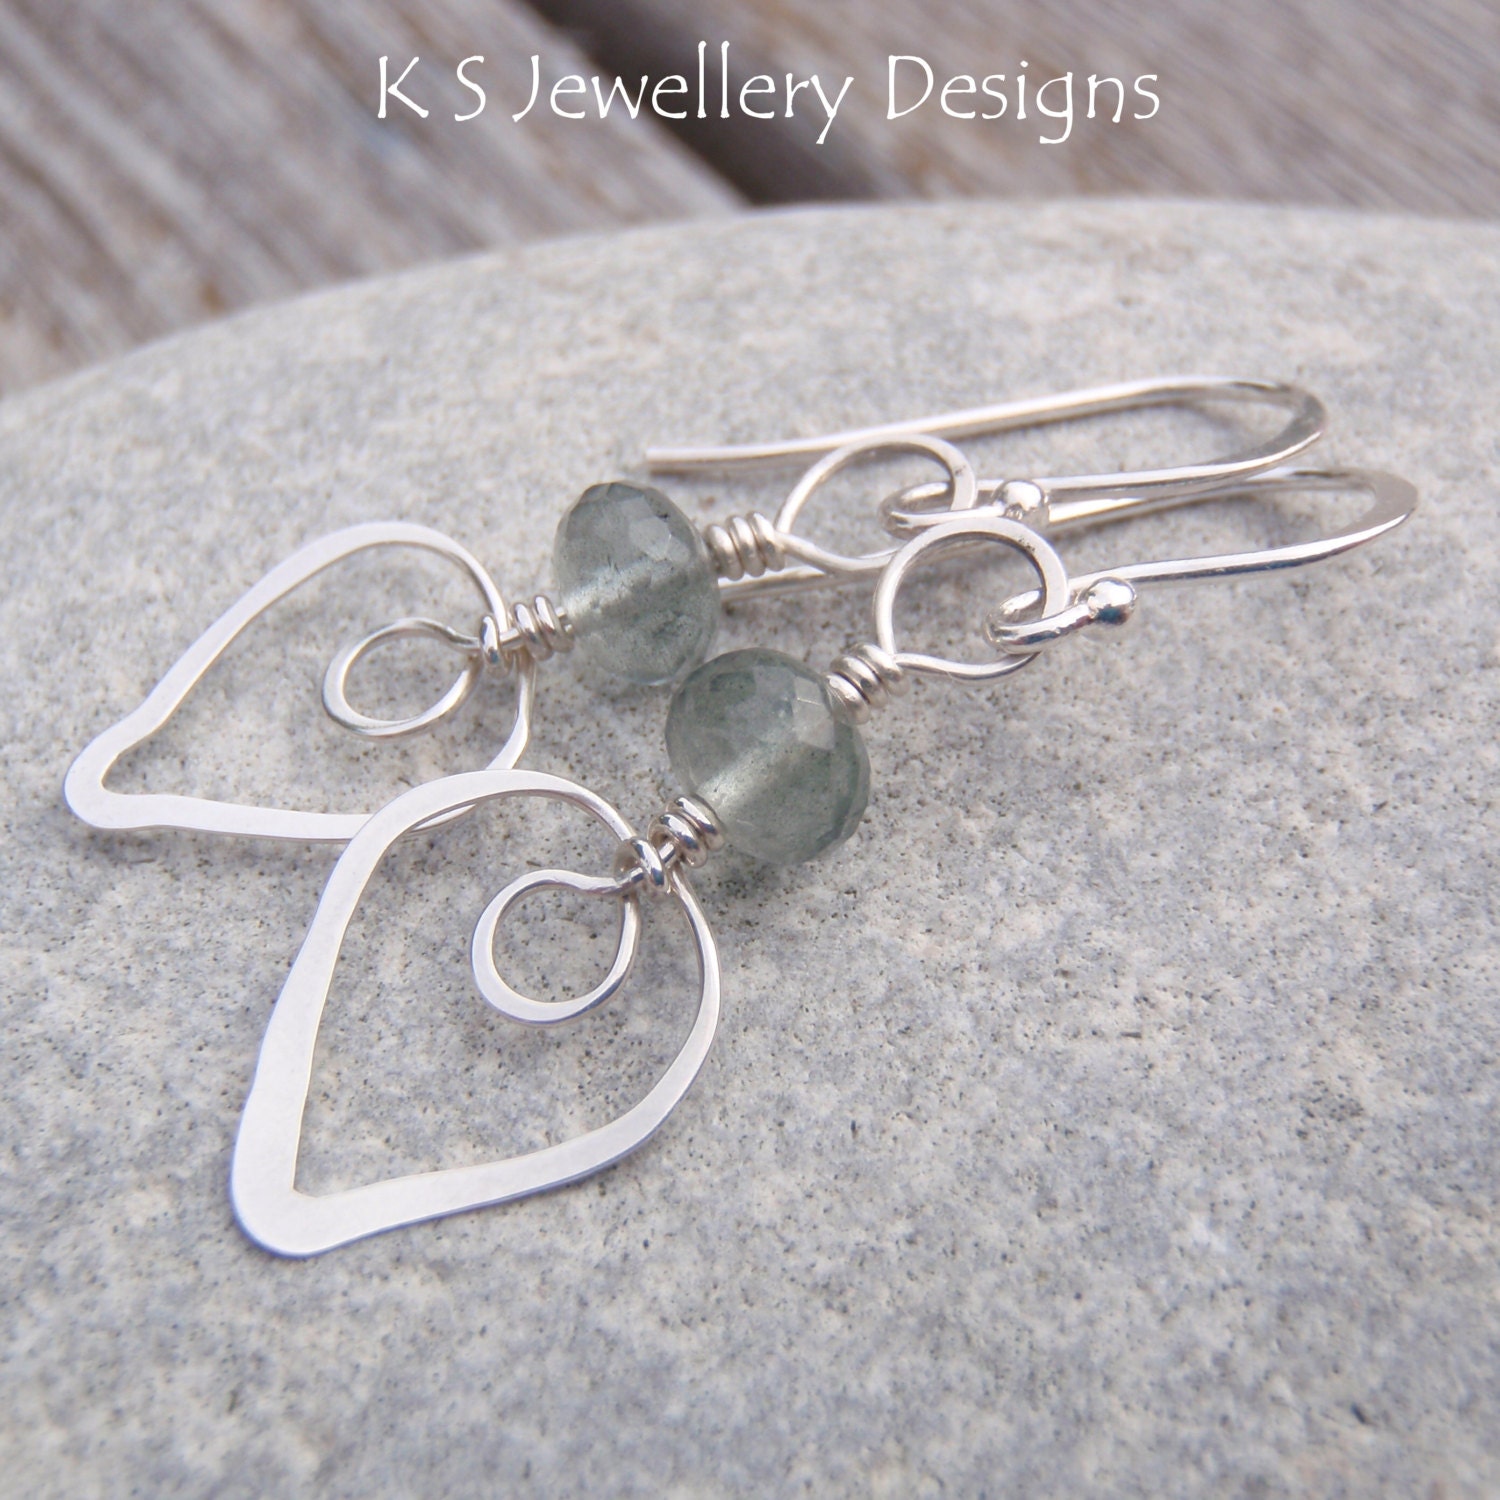 Curvy Twins Earrings wire wrapping tutorial